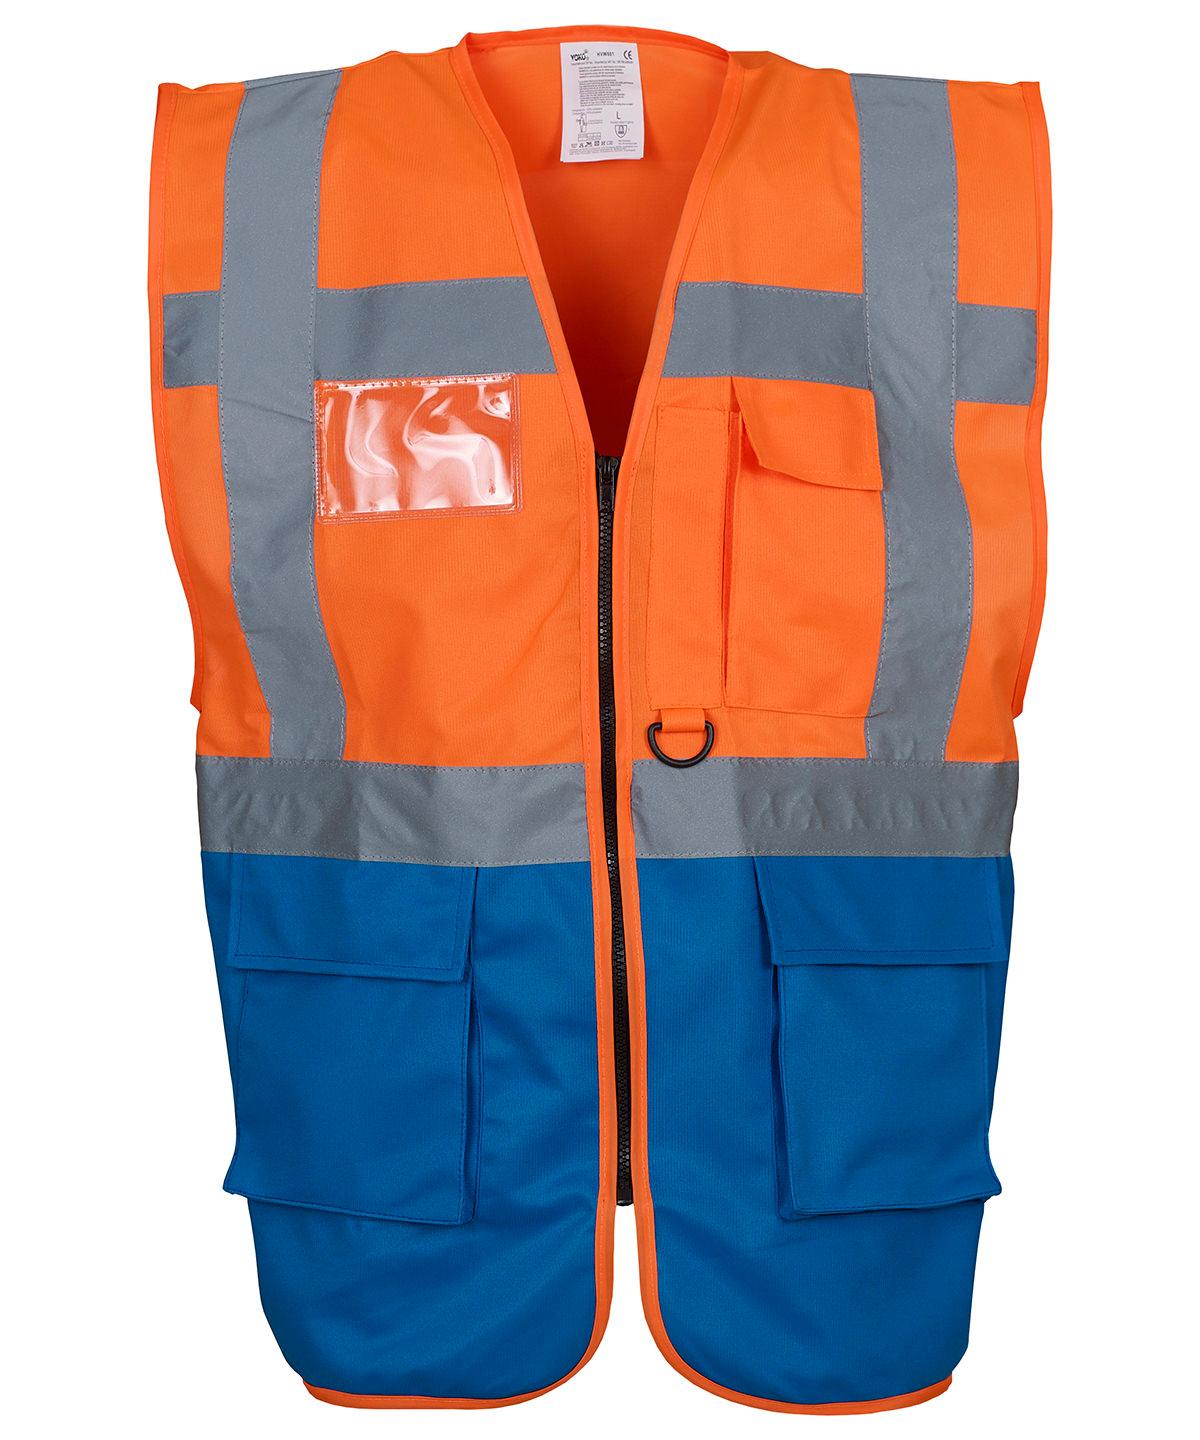 Orange/Royal Blue - Multifunctional executive hi-vis waistcoat (HVW801) Safety Vests Yoko Must Haves, Personal Protection, Plus Sizes, Safety Essentials, Safetywear, Workwear Schoolwear Centres